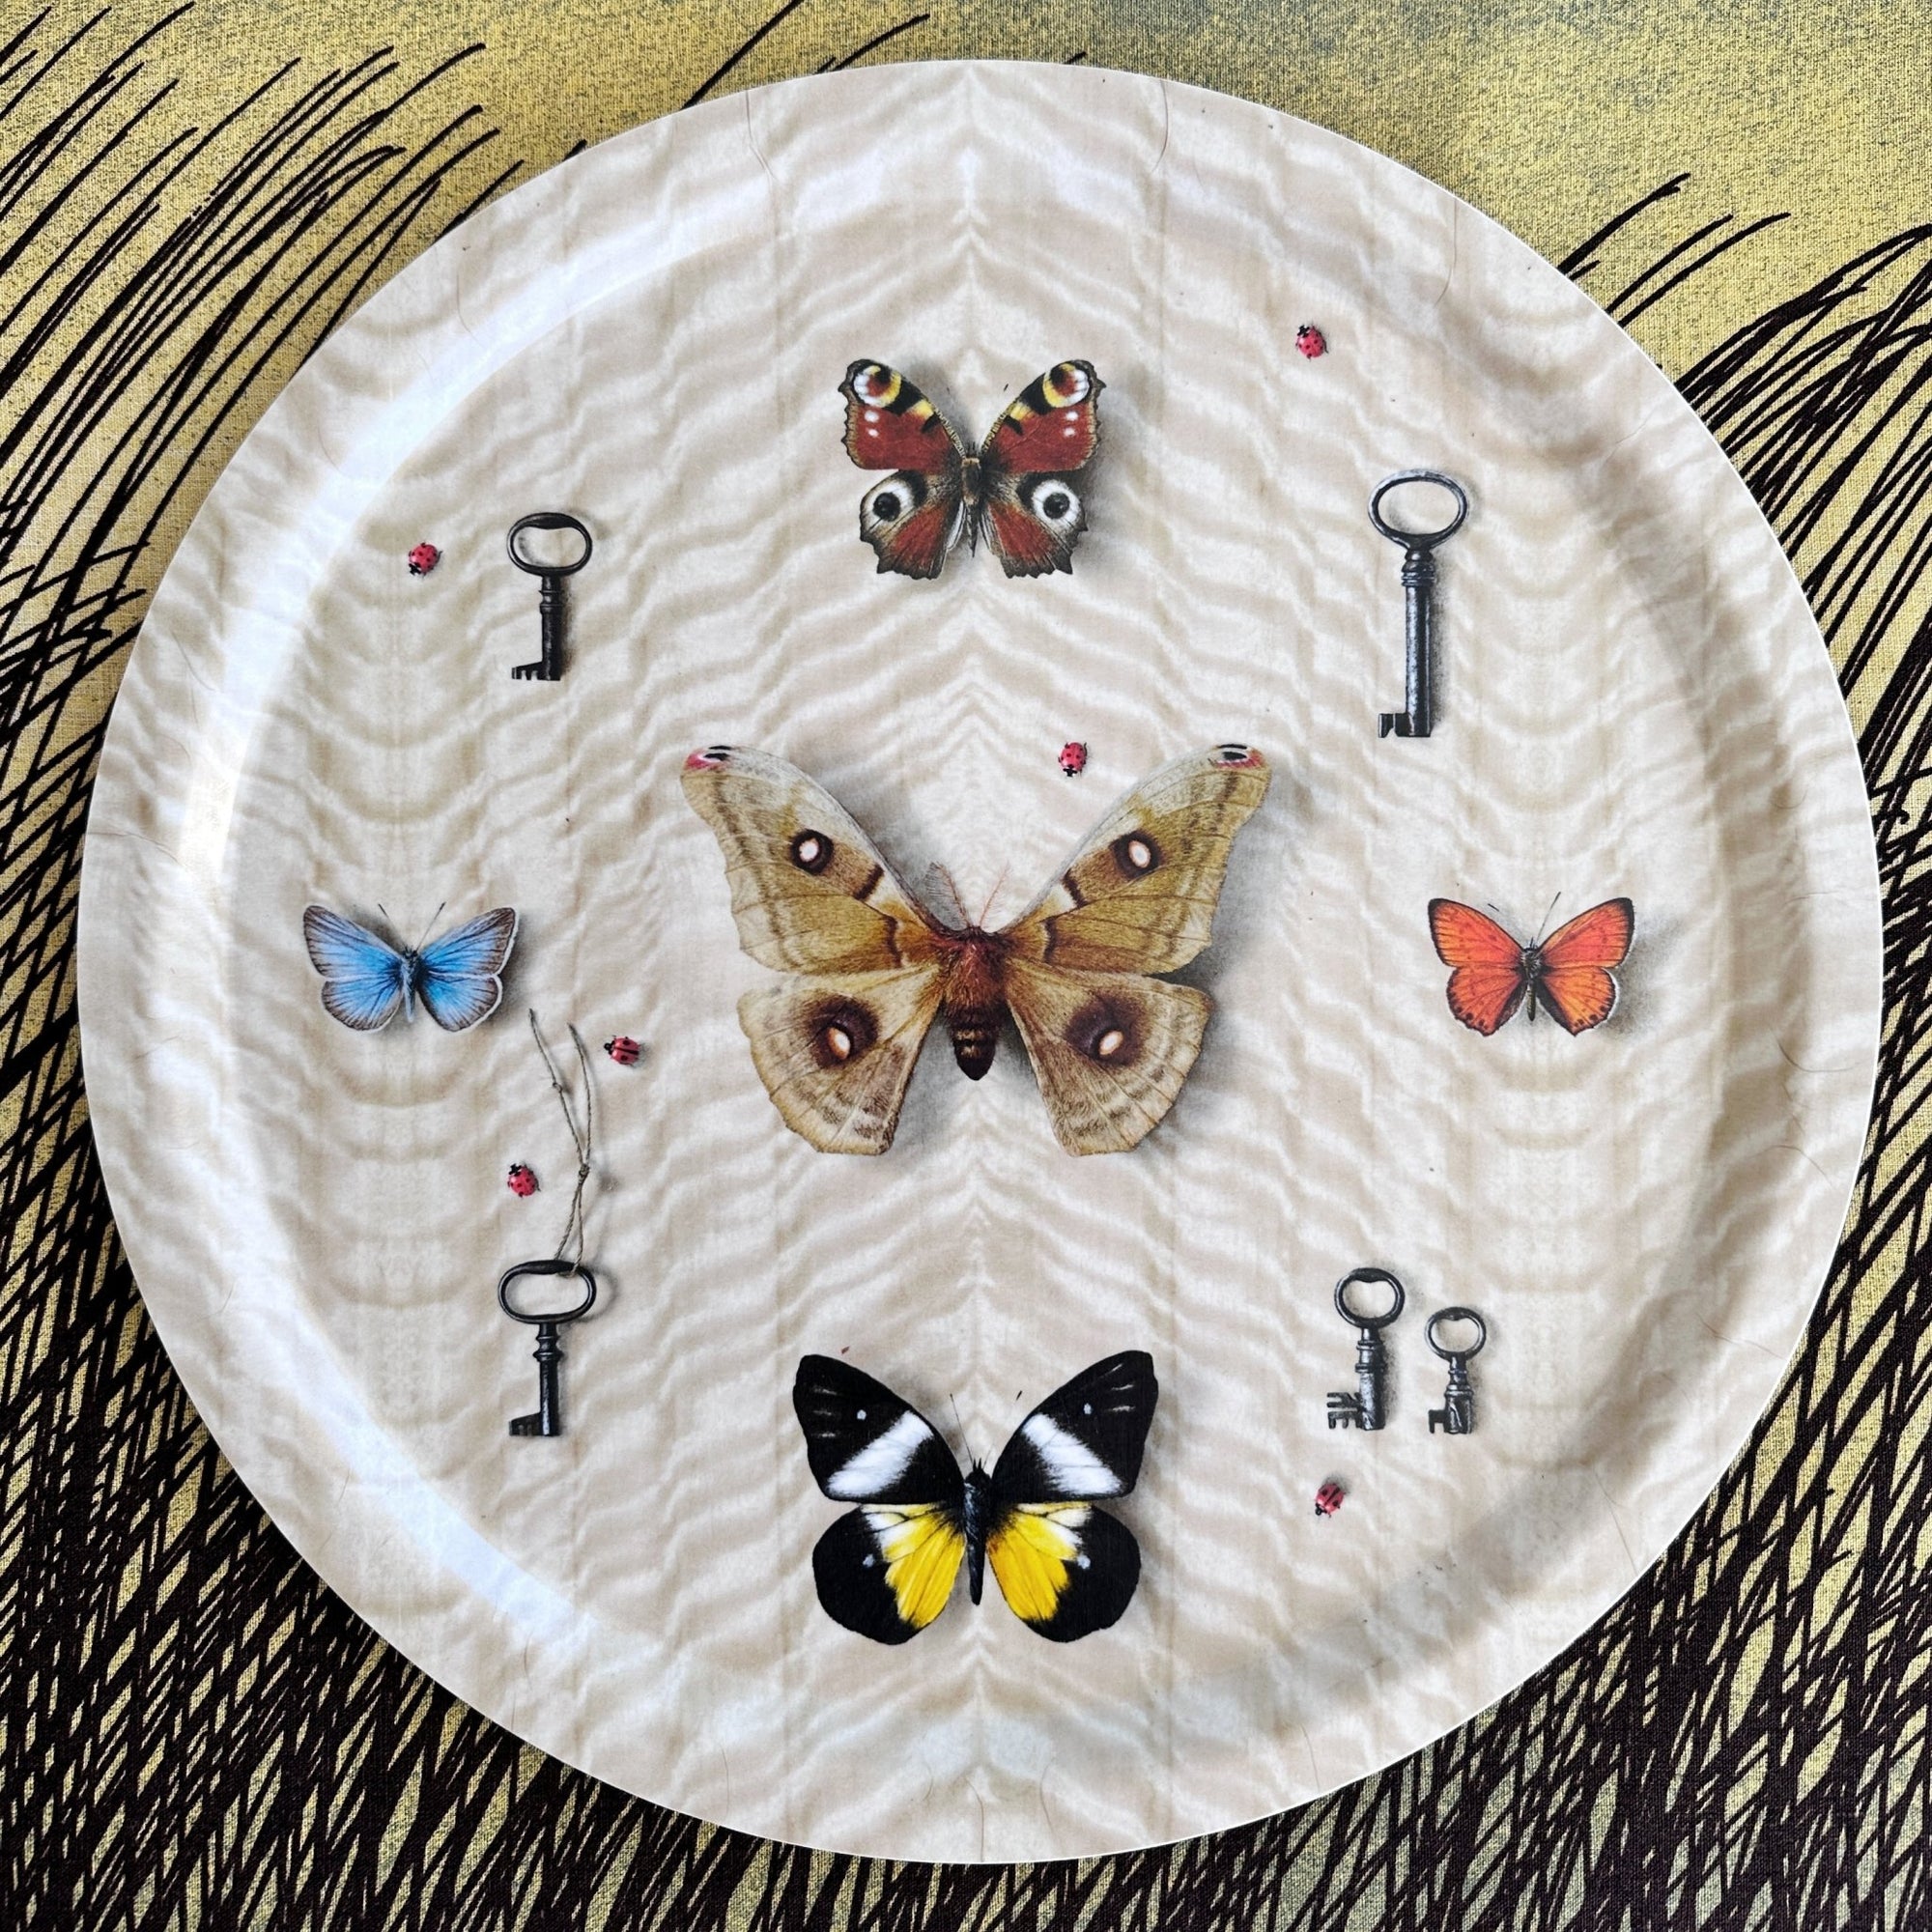 Butterfly Round Tray - Michael Angove